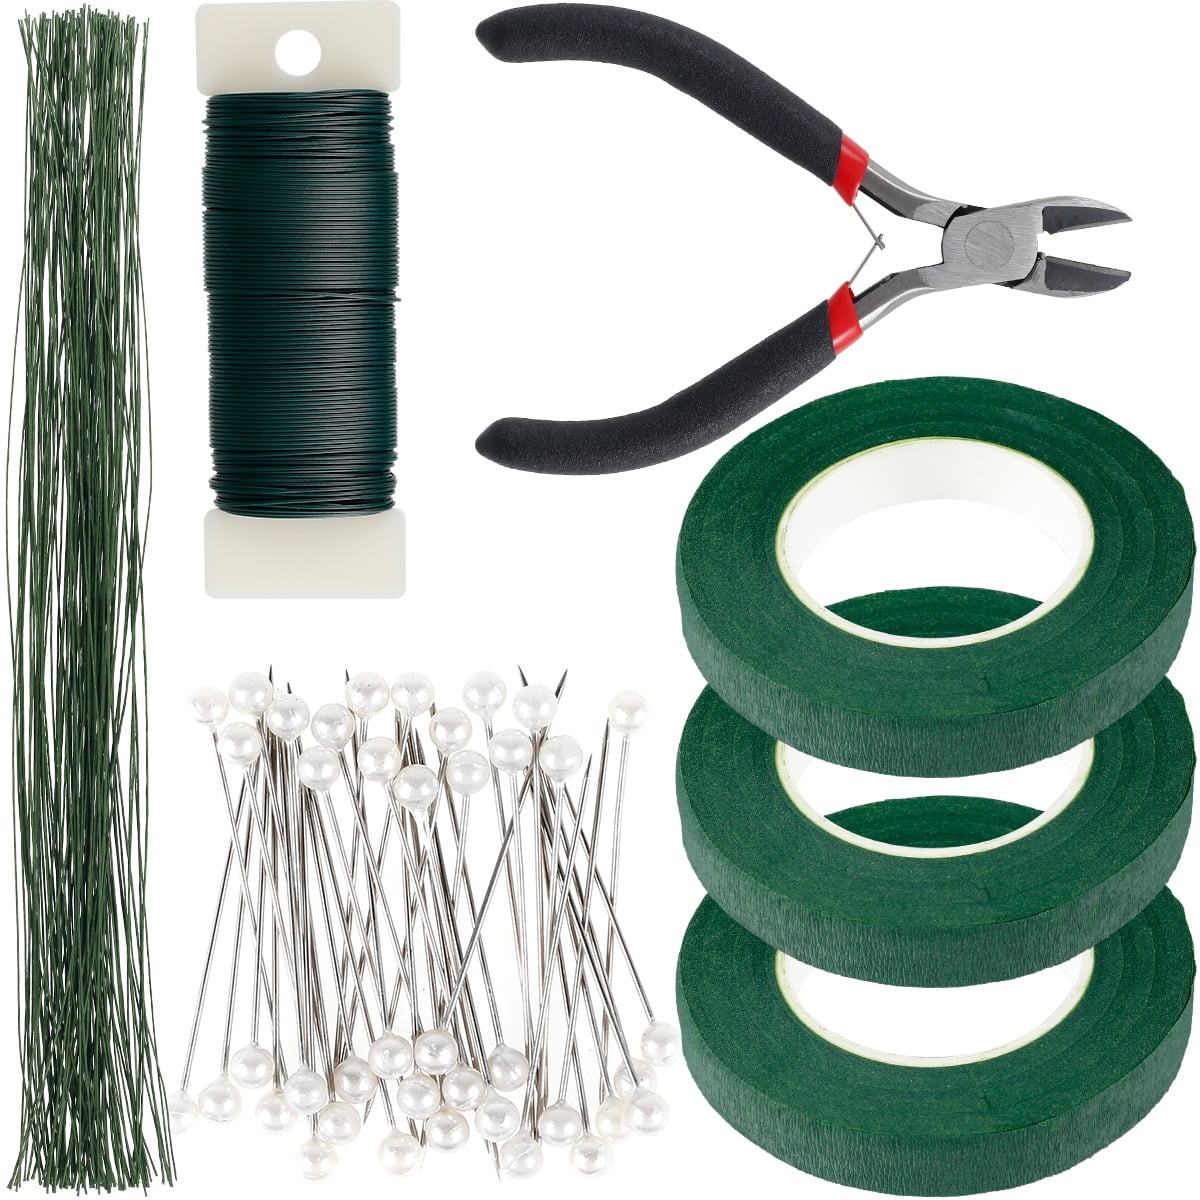 Hapeisy Floral Tape and Floral Wire, Floral Arrangement Kit with Green Floral  Tape and Floral Wire, Boutonniere Flower pin, Wire Cutter for Wreath Making  Supplies7pcs/14pcs 